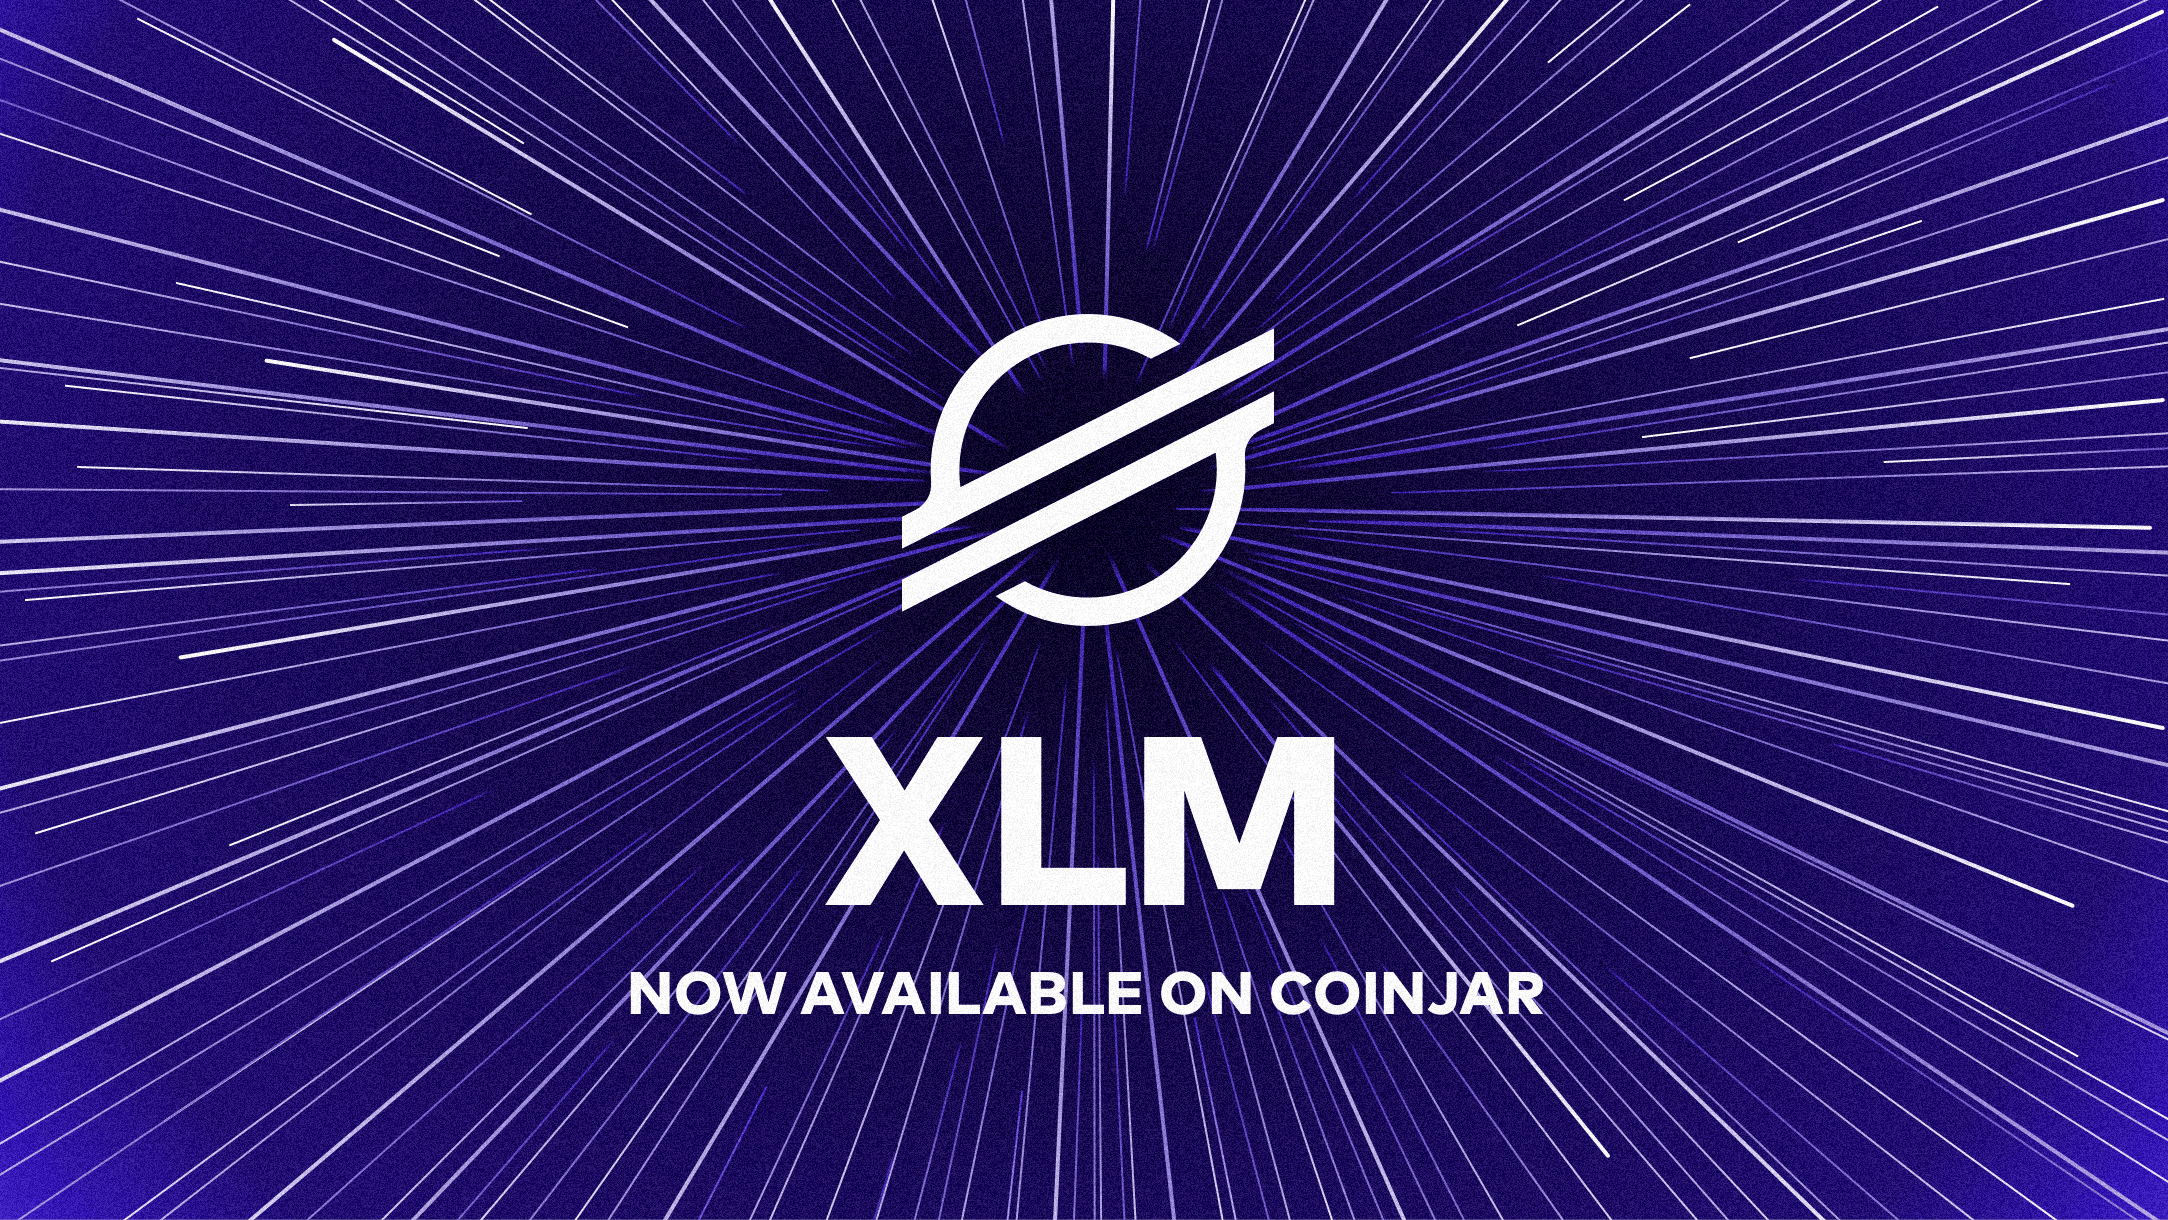 Stellar lumens (XLM) are now available for trading on CoinJar!